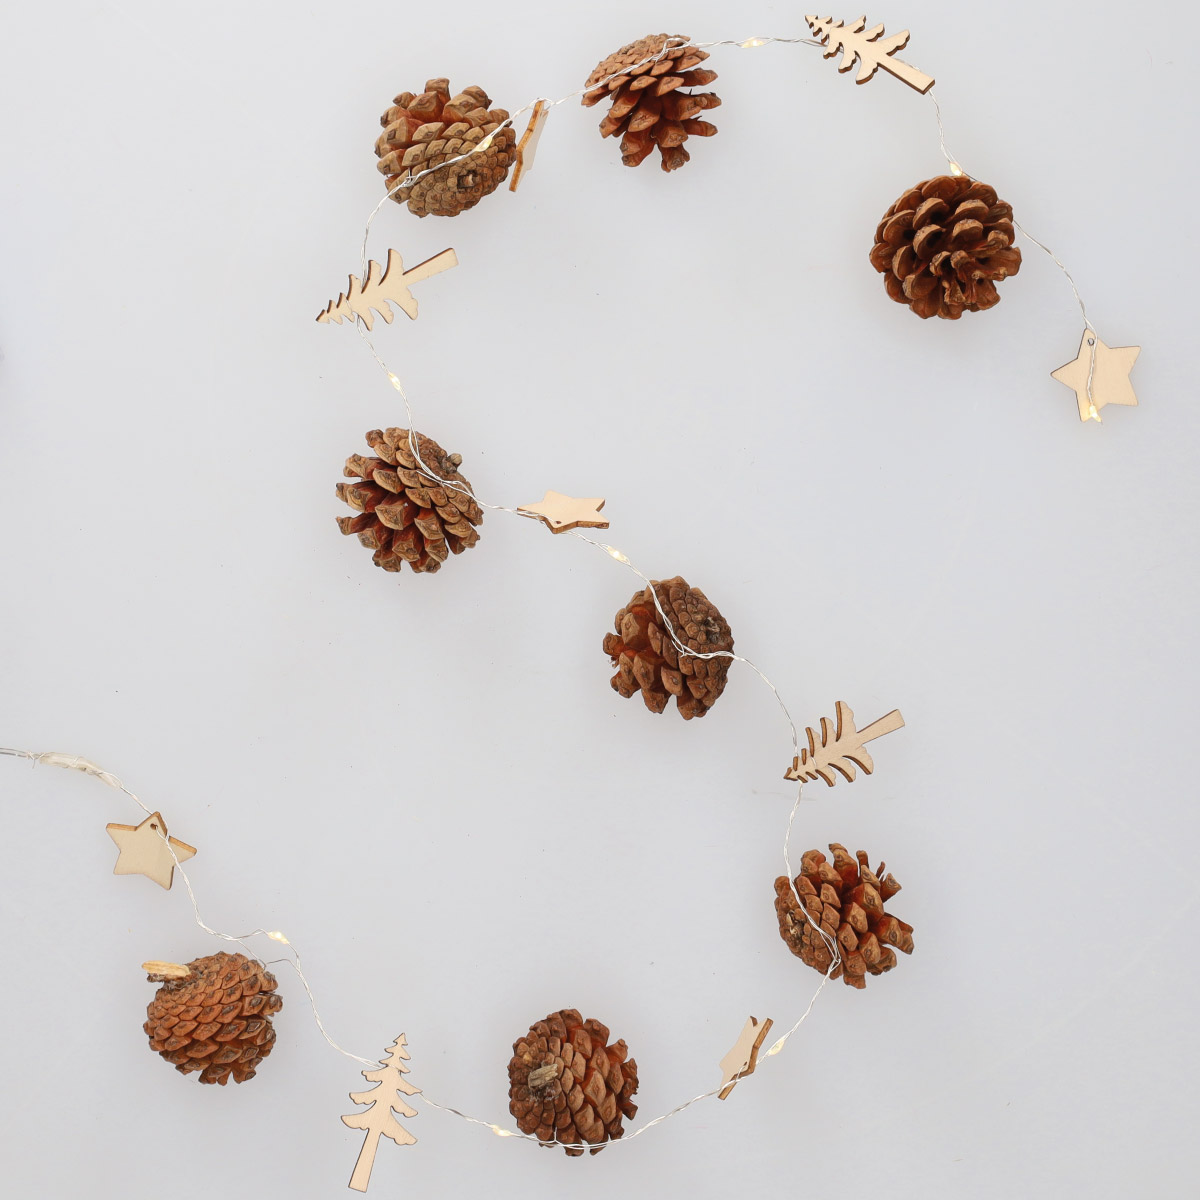 1M LED garland with stars, pine cones and small wood trees Warm White